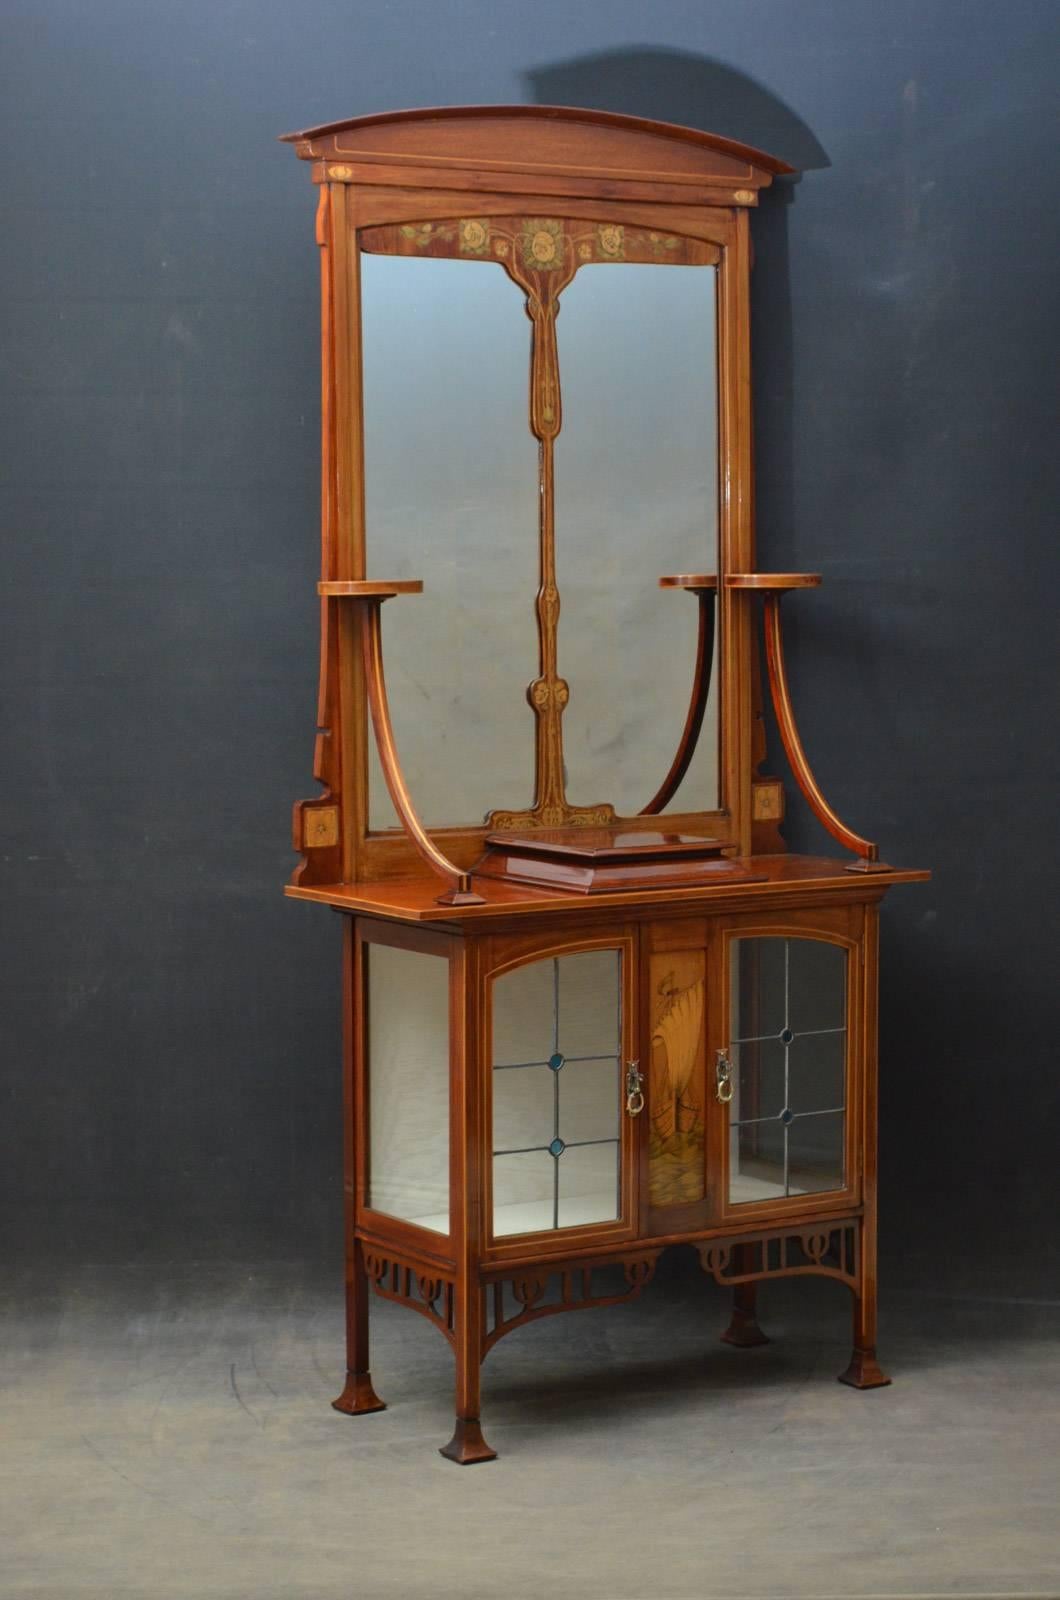 Sn4337 stylish Art Nouveau mahogany and marquetry hall cabinet or side cabinet, having arched cresting above divided mirror flanked by a pair of circular platforms on downswept supports, the projecting base having finely inlaid centre panel